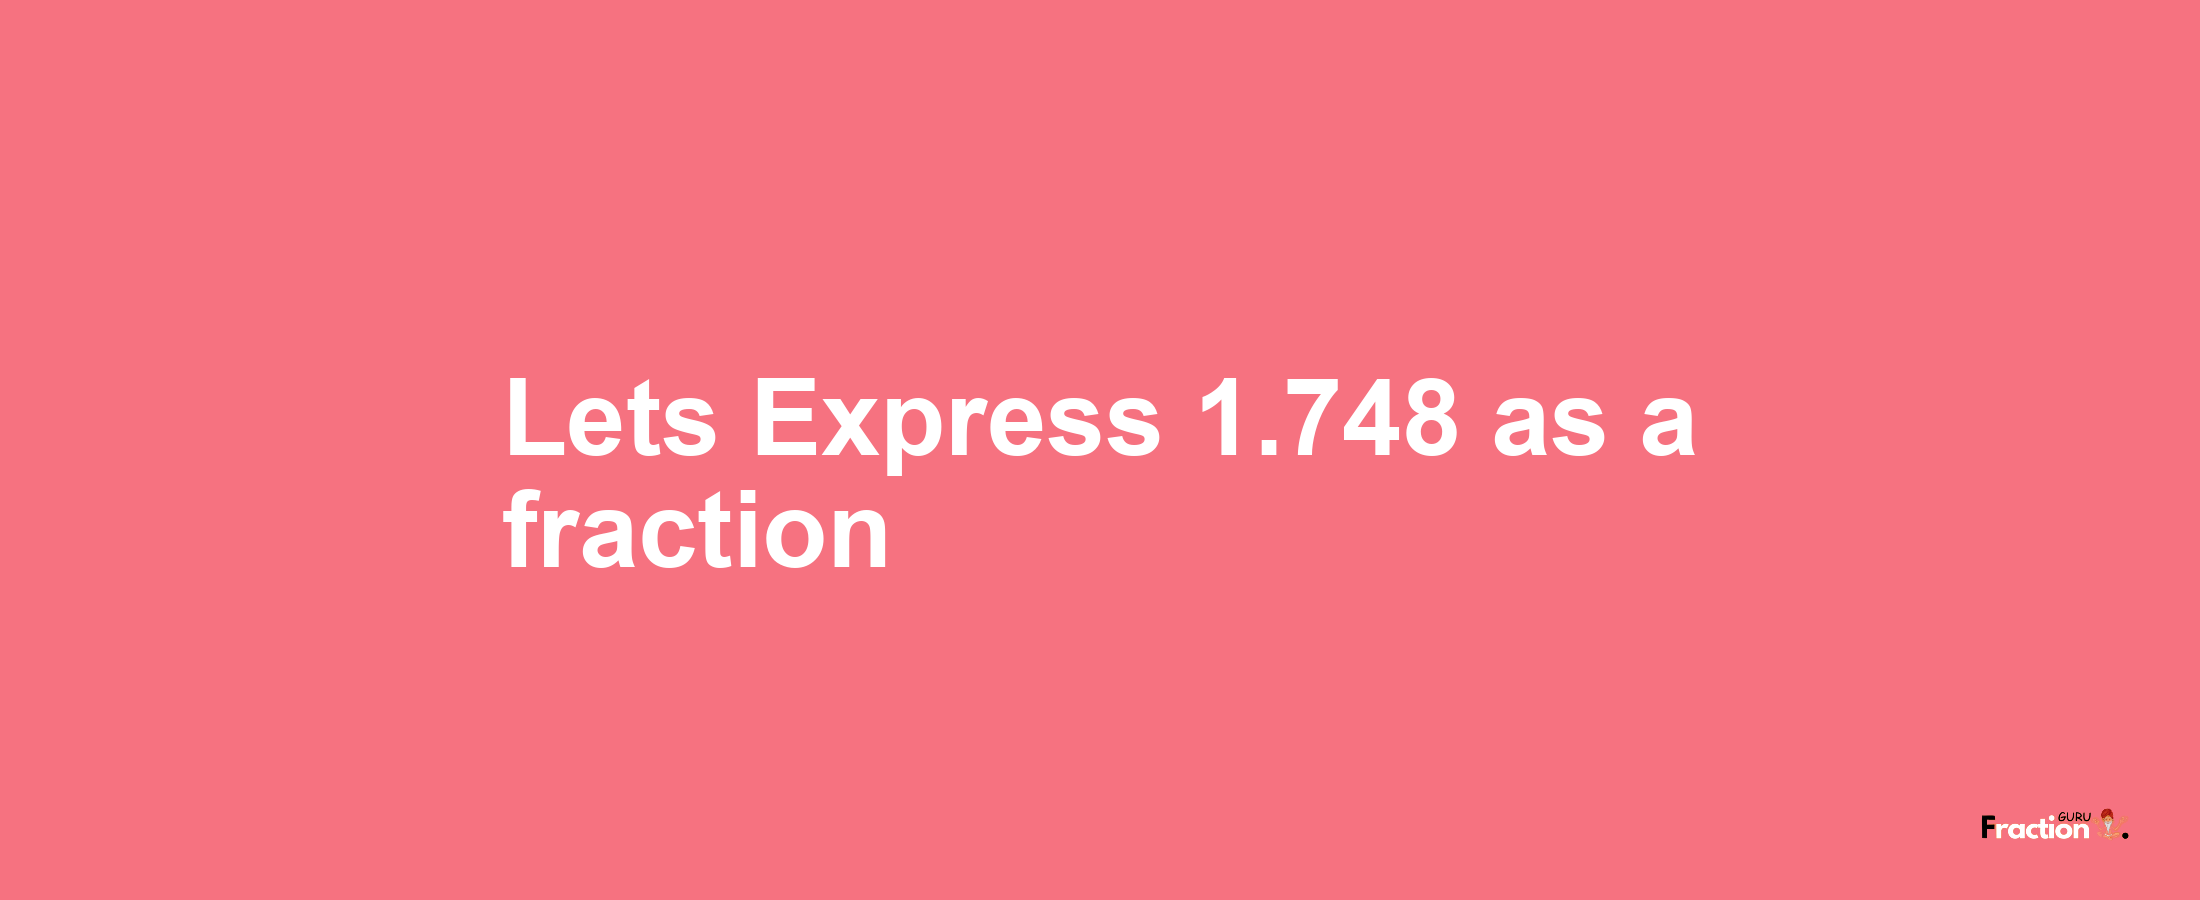 Lets Express 1.748 as afraction